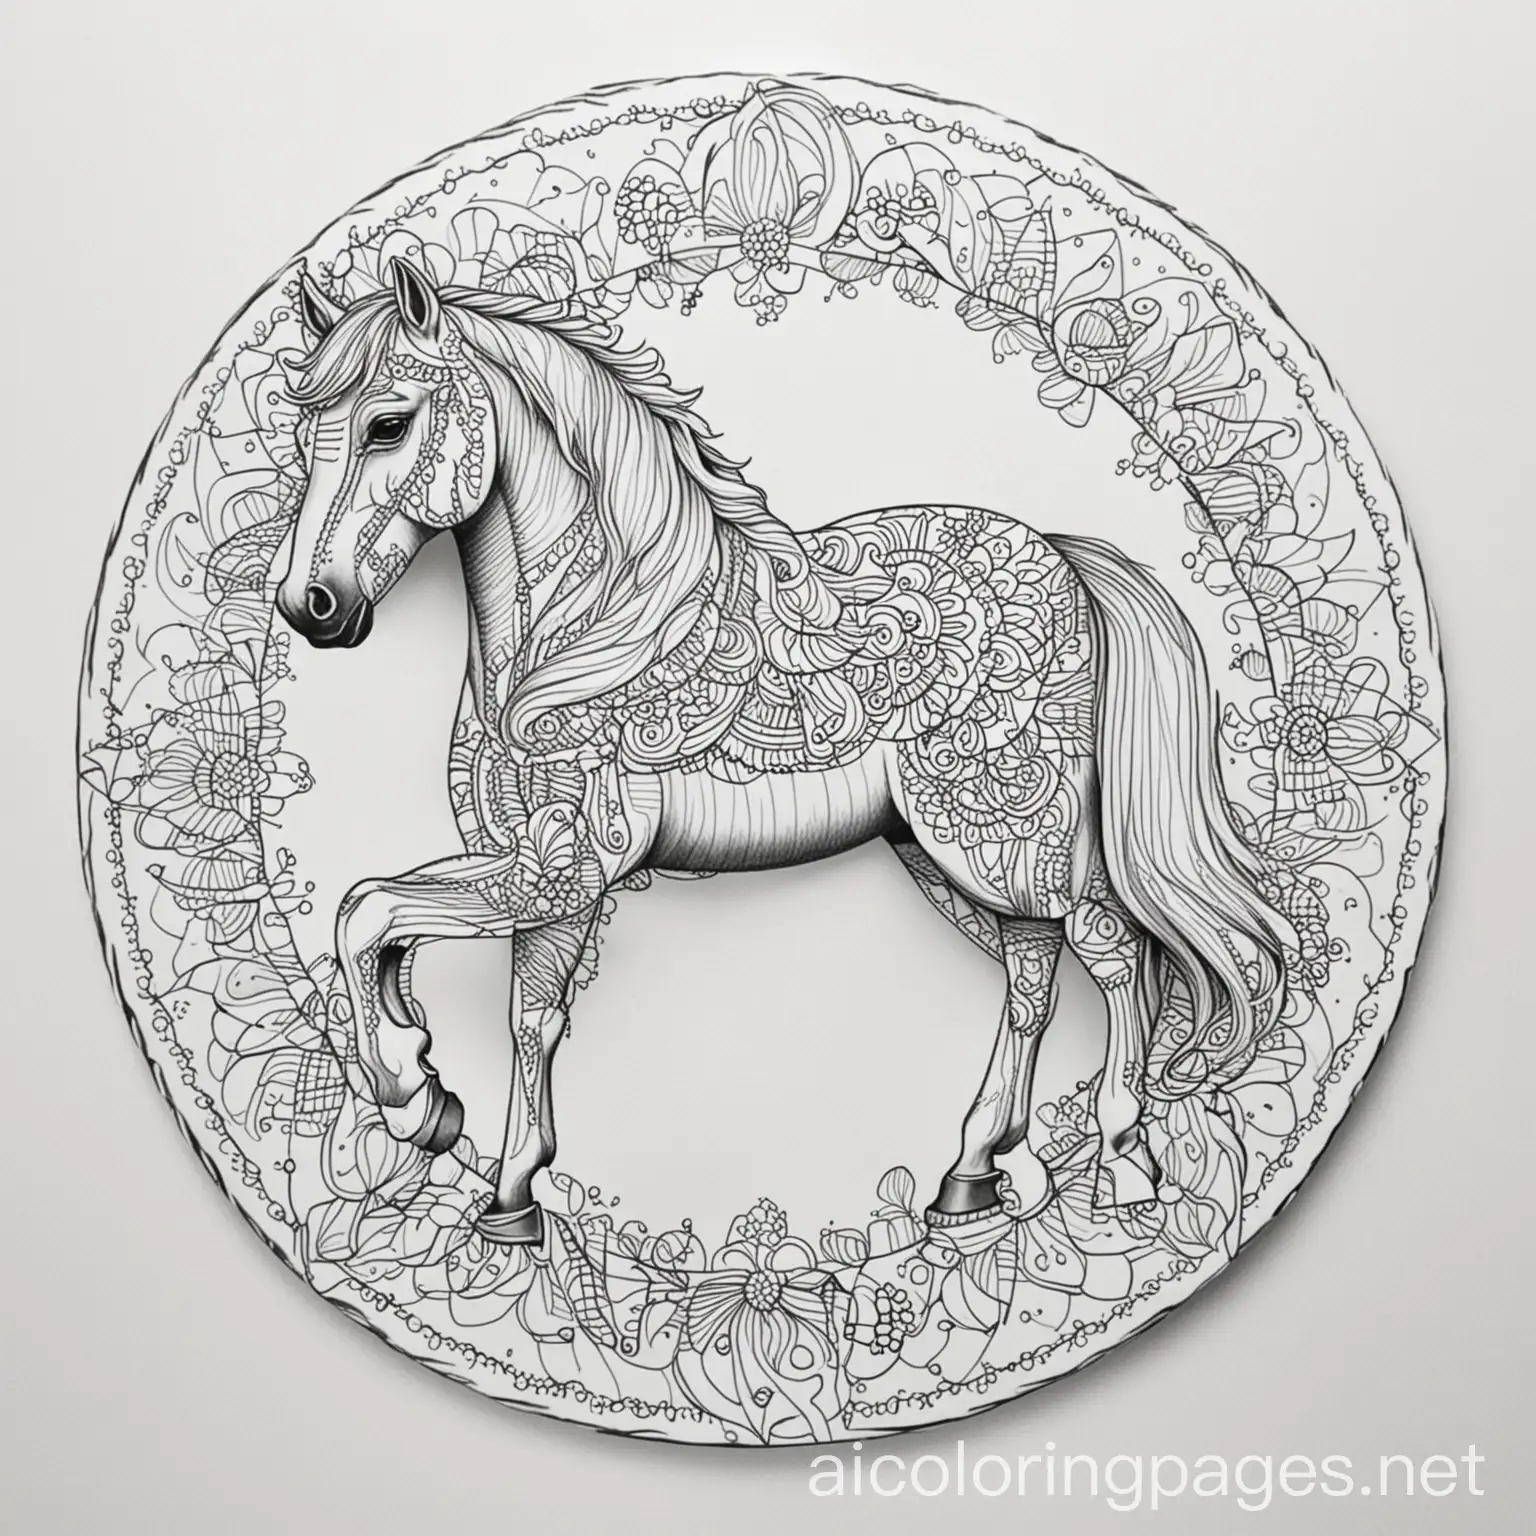 Mandala-Horse-Coloring-Page-Black-and-White-Line-Art-for-Kids